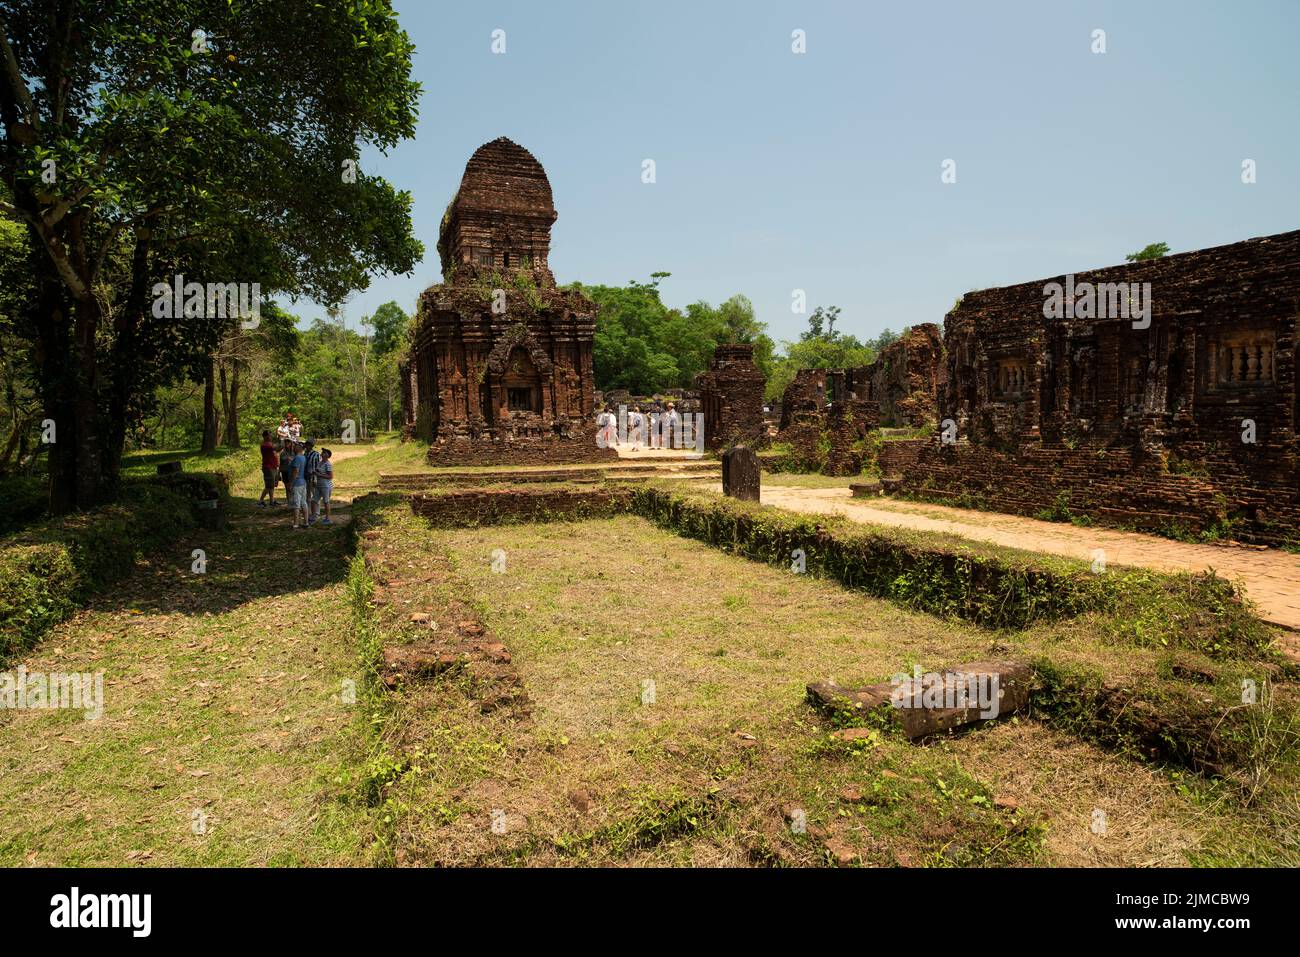 My Son UNESCO World Heritage site near Hoi An in central Vietnam is an ancient Hindu temple complex of the Cham people. Ruins of Old hindu temple Stock Photo